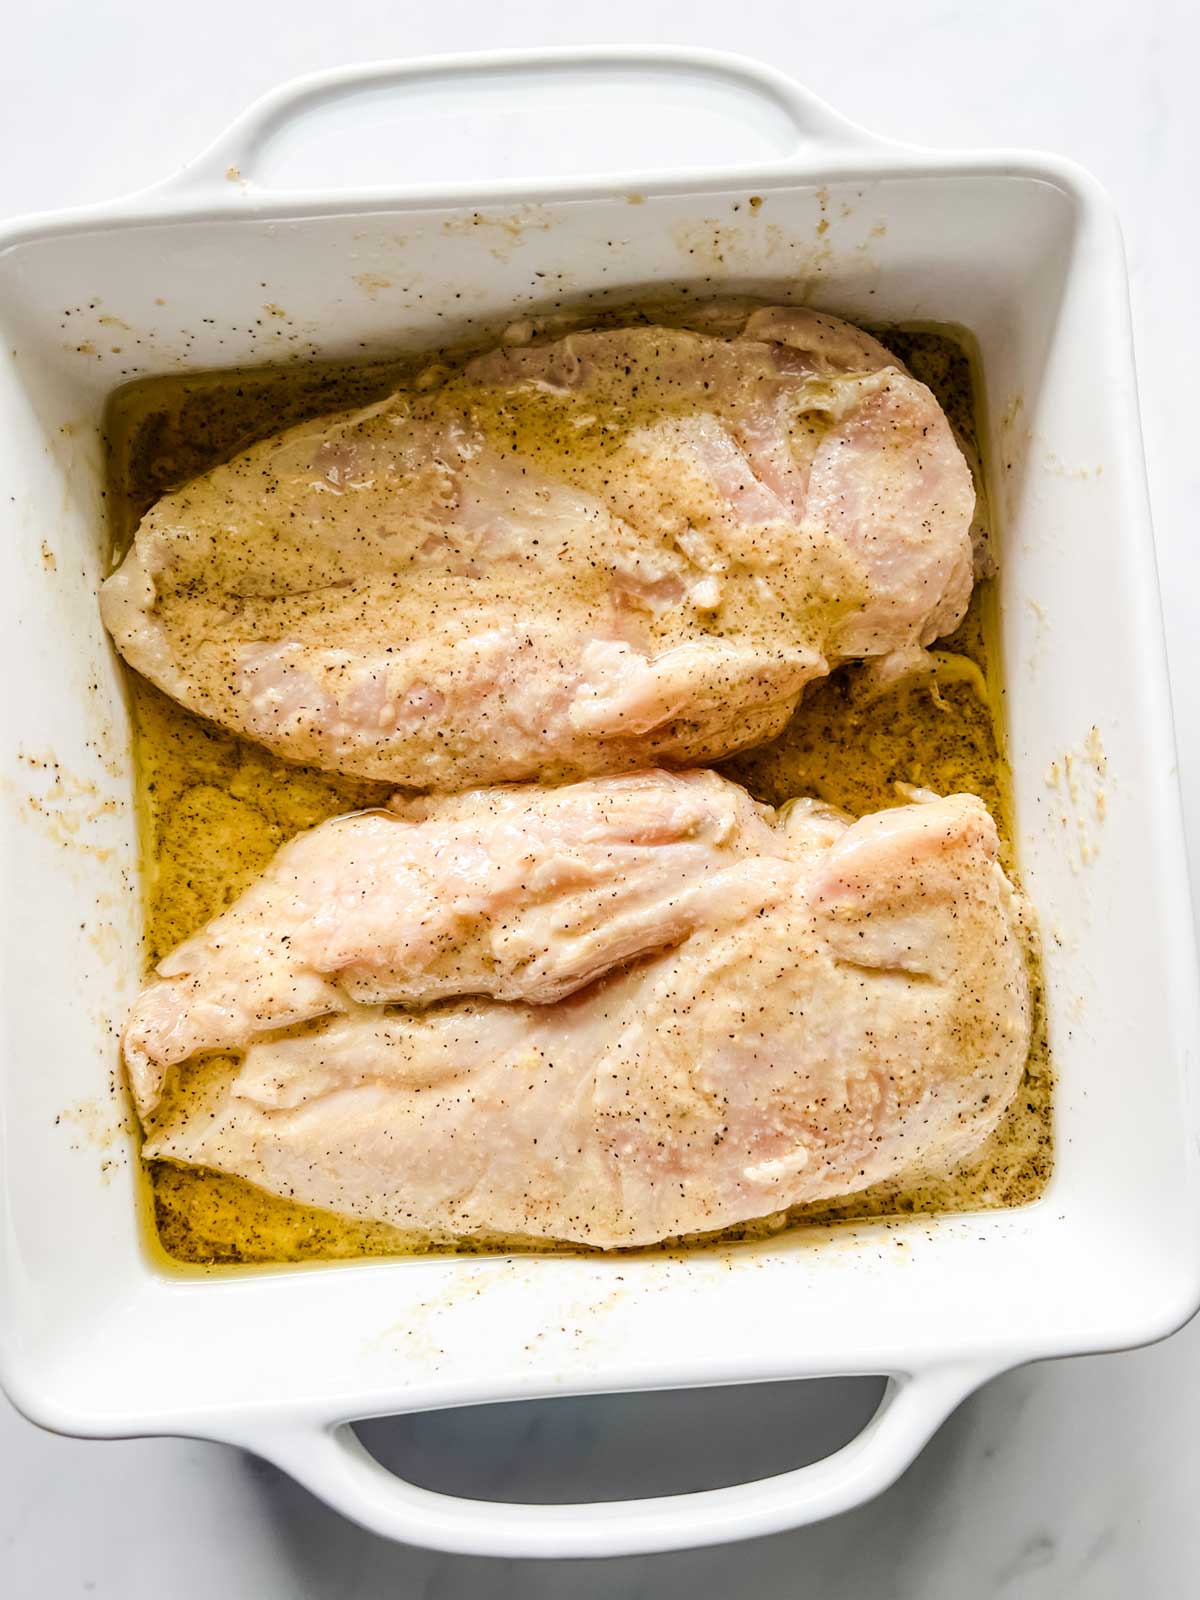 Chicken marinating in a shallow dish.